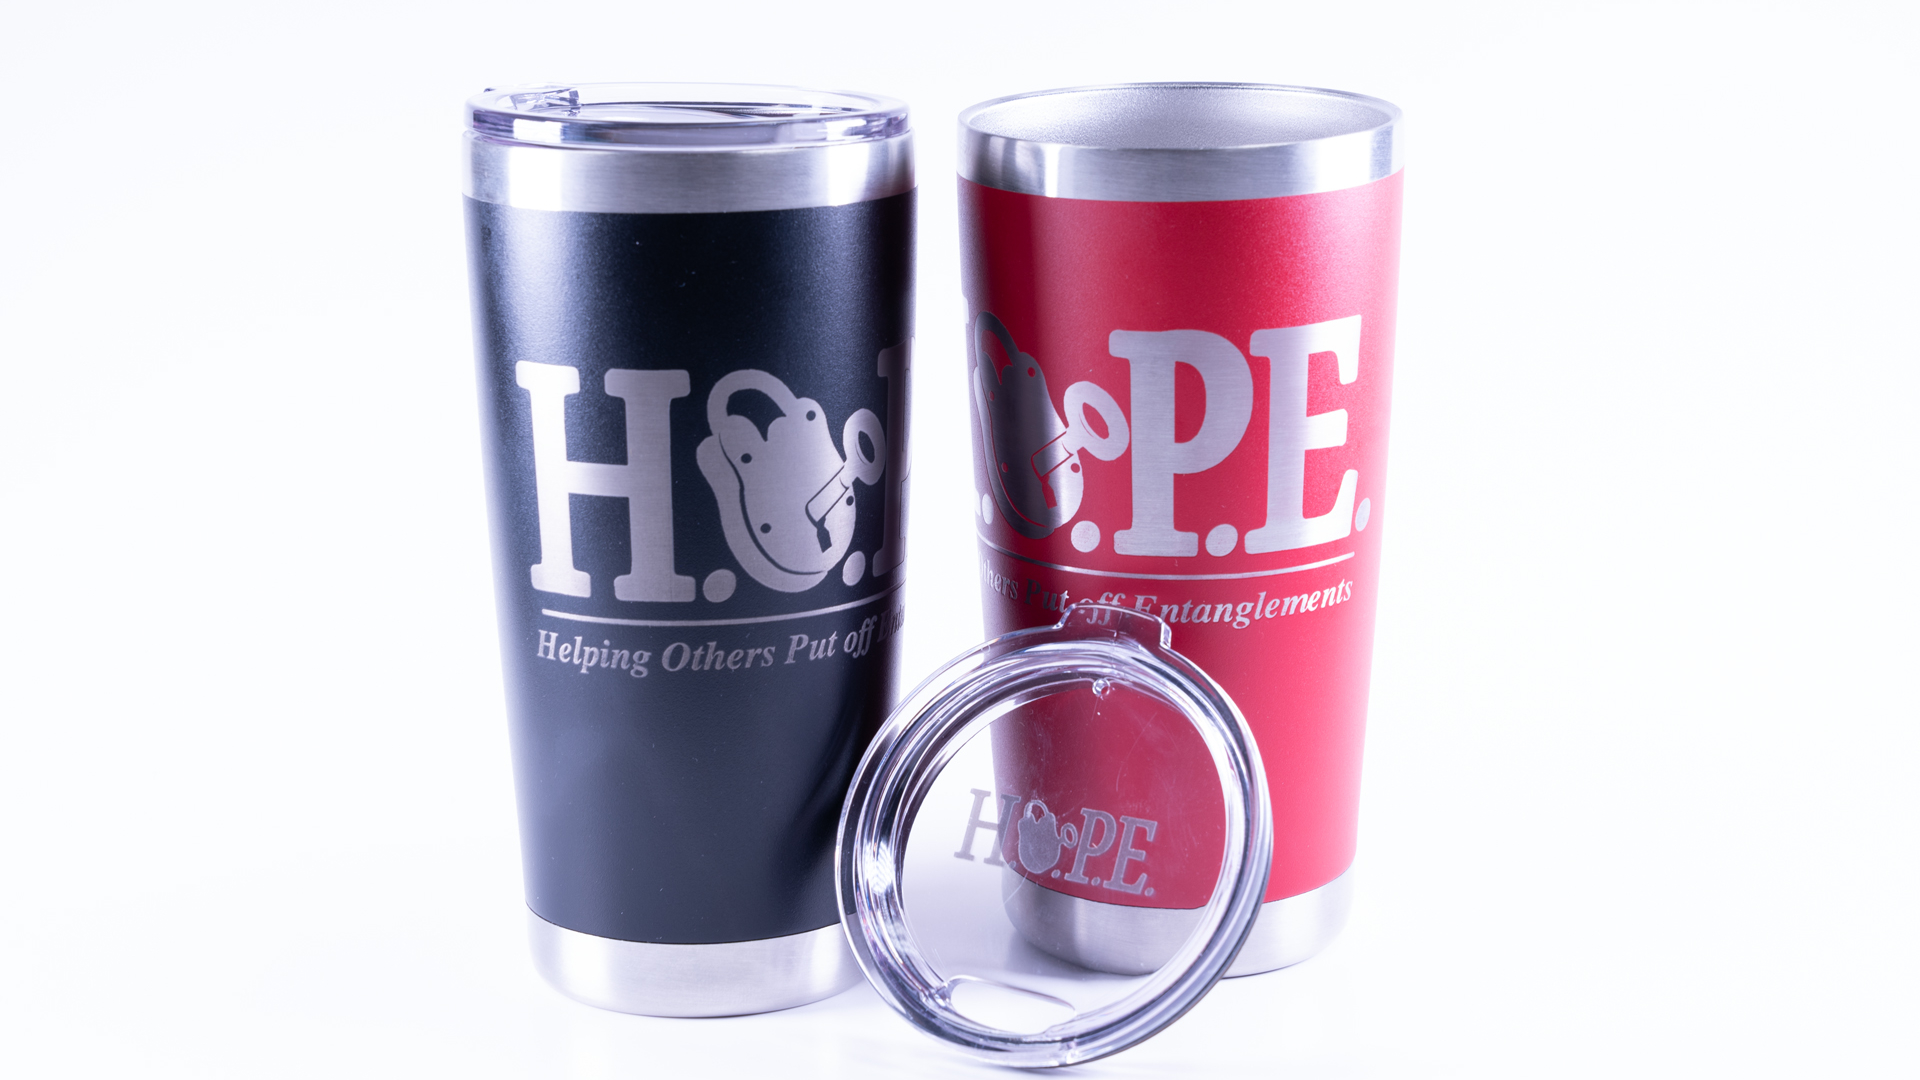 https://hope4addictions.com/wp-content/uploads/2022/08/HOPE-Cold-Hot-Tumbler-with-Lid-1.jpg